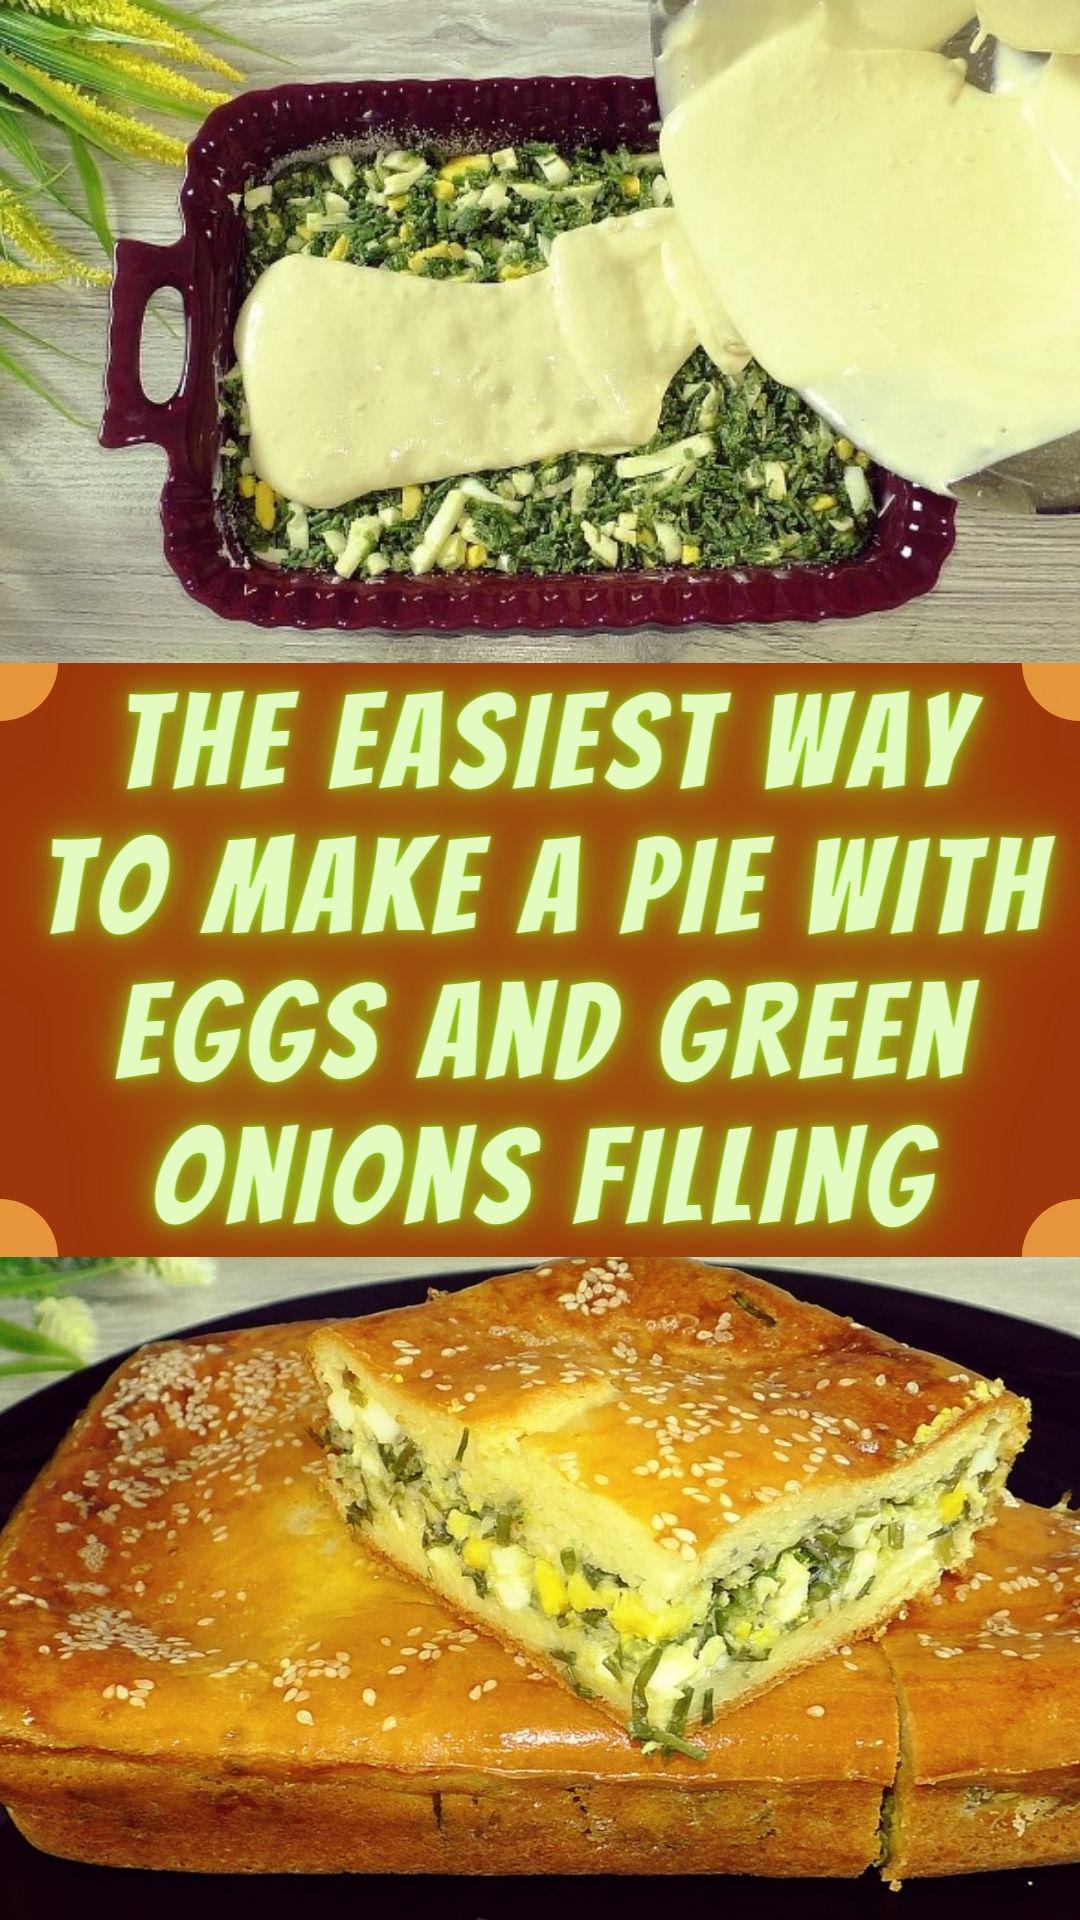 The easiest way to make a pie with eggs and green onions filling